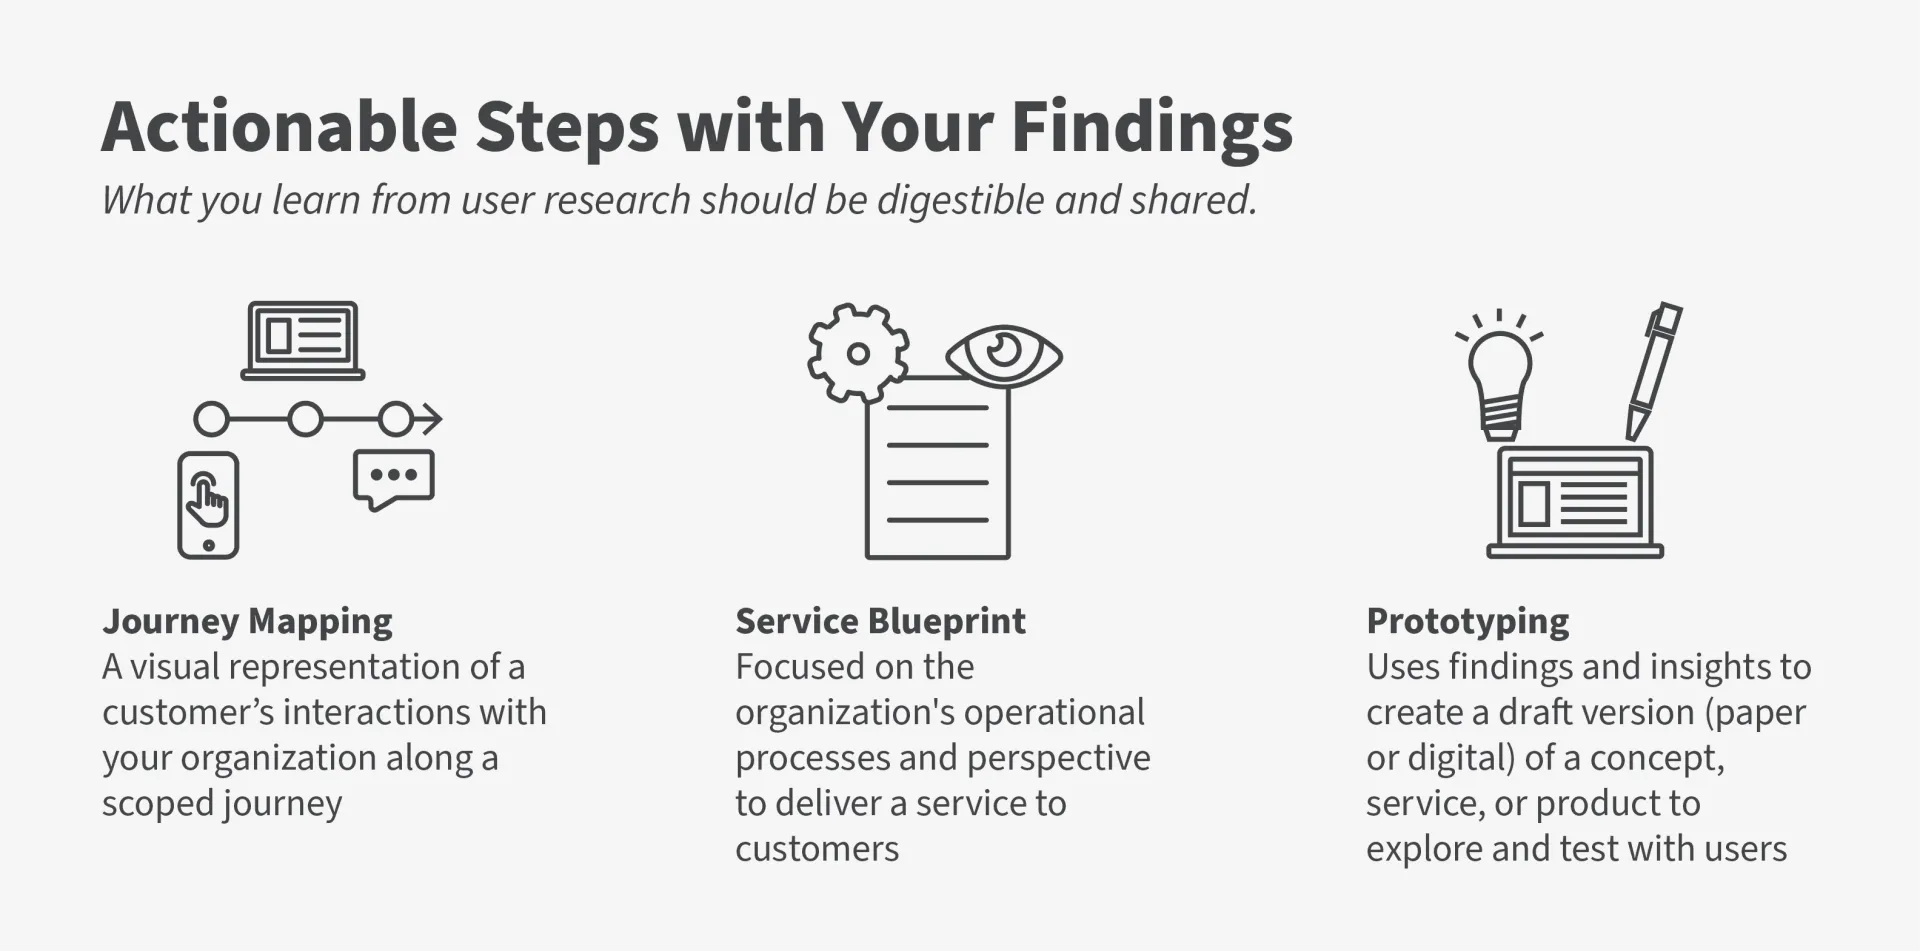 Infographic with three icons showing three ways to take actionable steps with your user research report being journey mapping, creating a service blueprint, and prototyping.